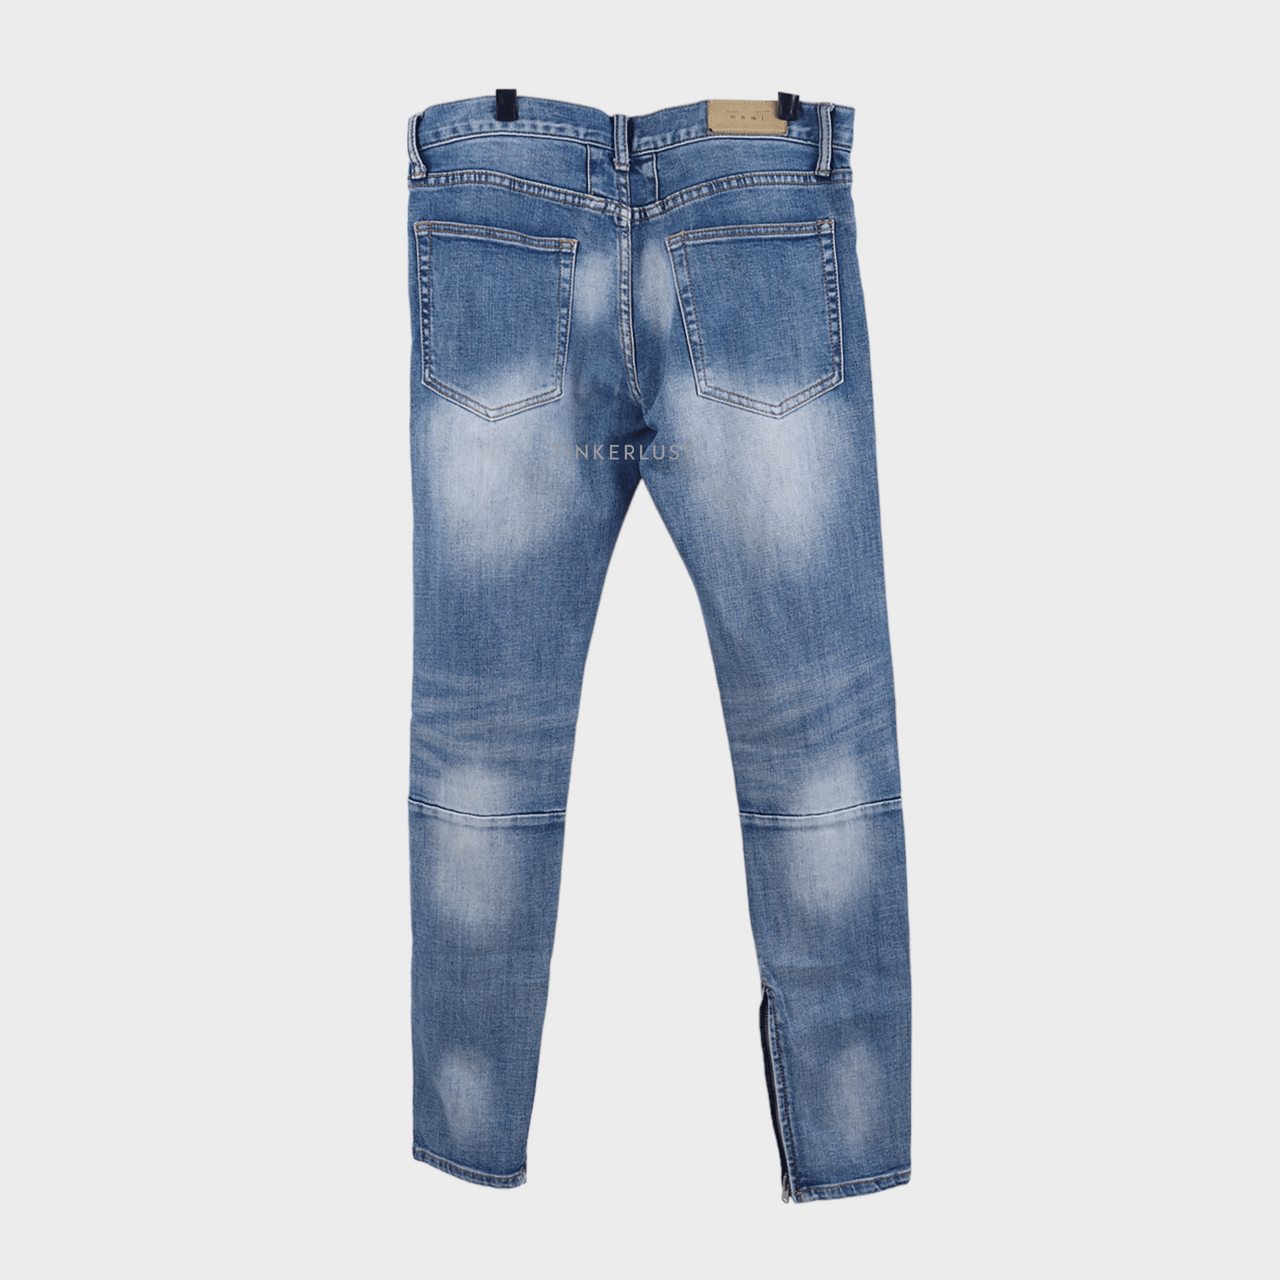 mnml Blue Washed Jeans Long Pants